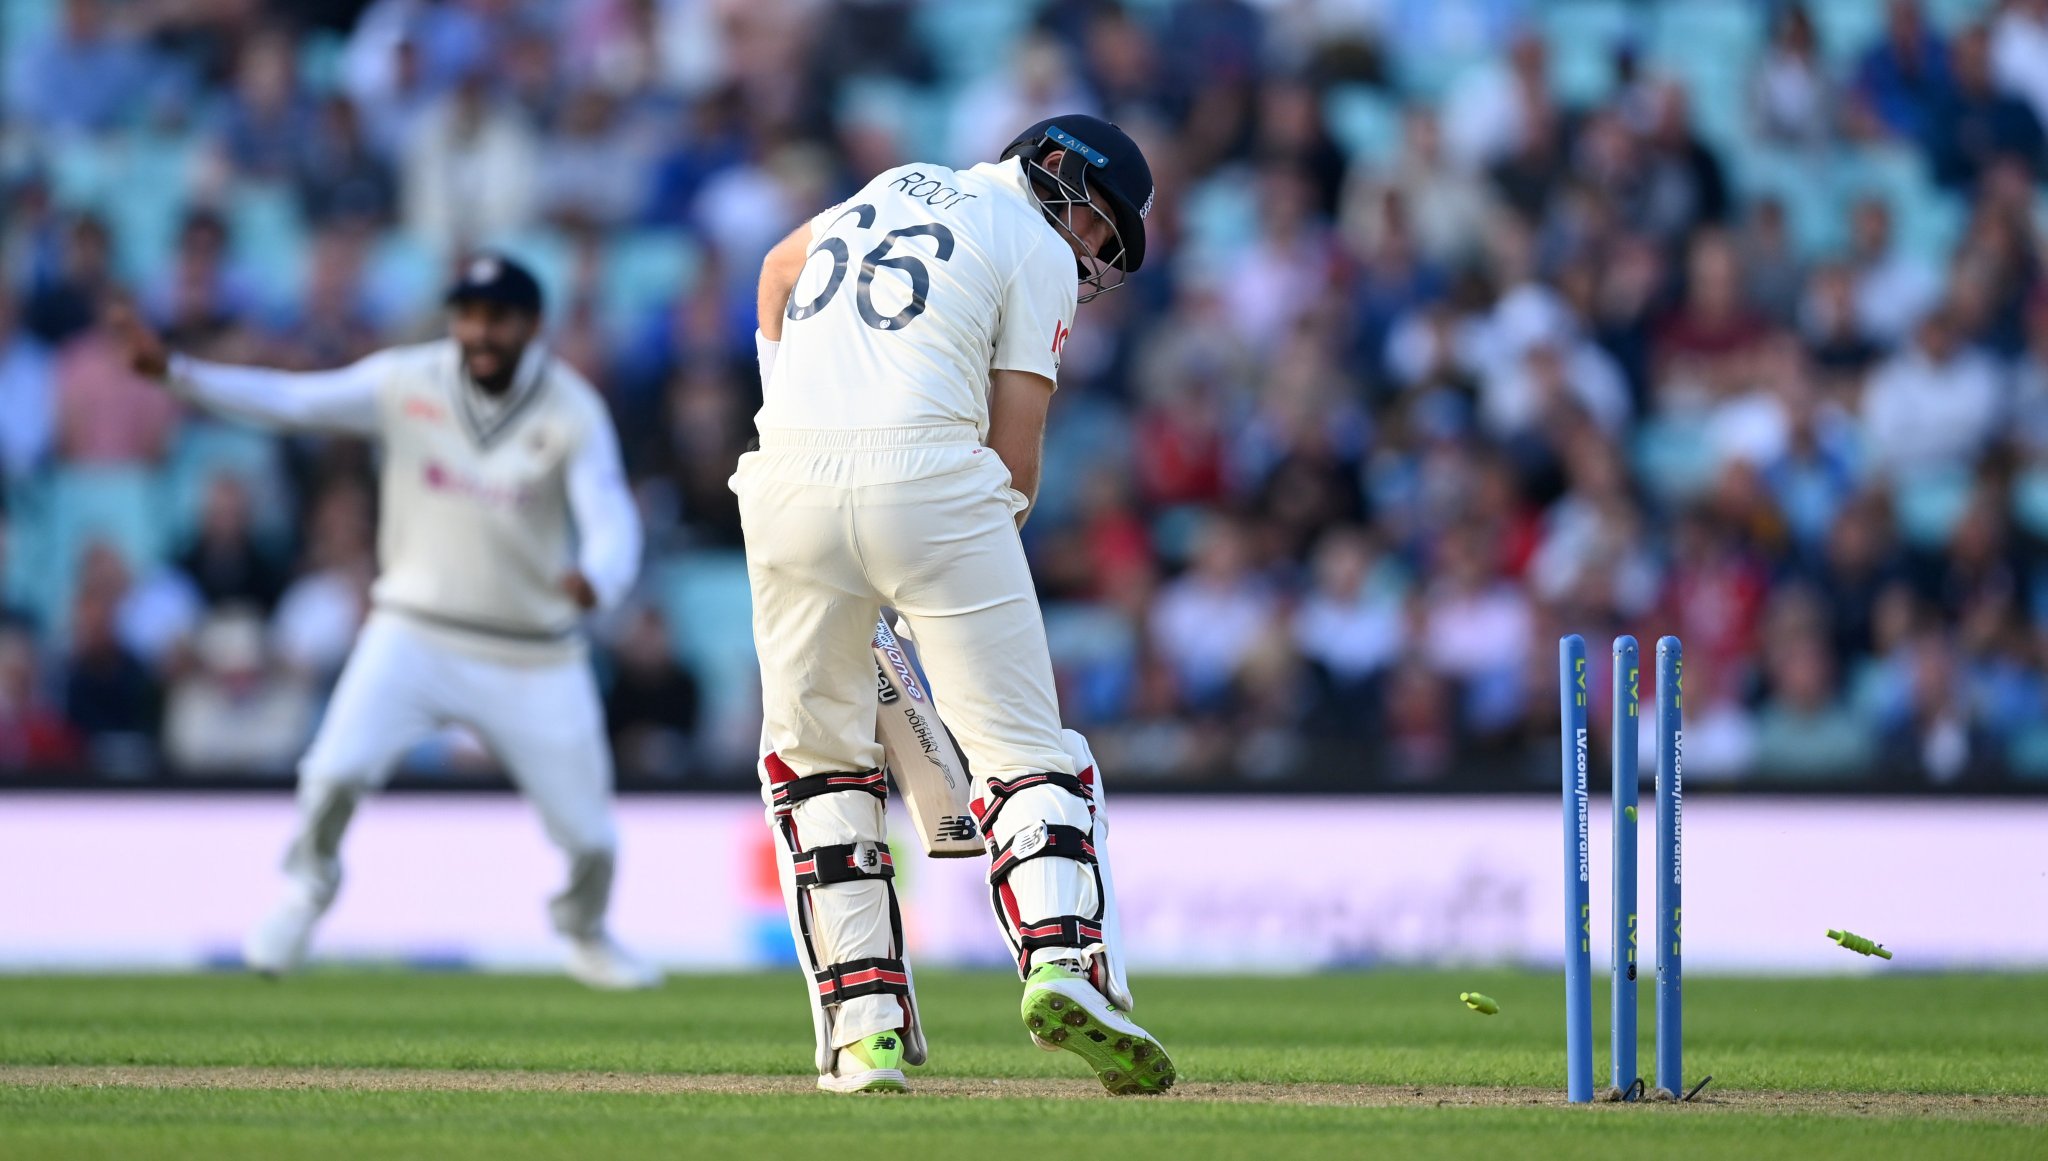 Watch – Umesh Yadav Uproots Joe Root With A Cracker Of A Delivery